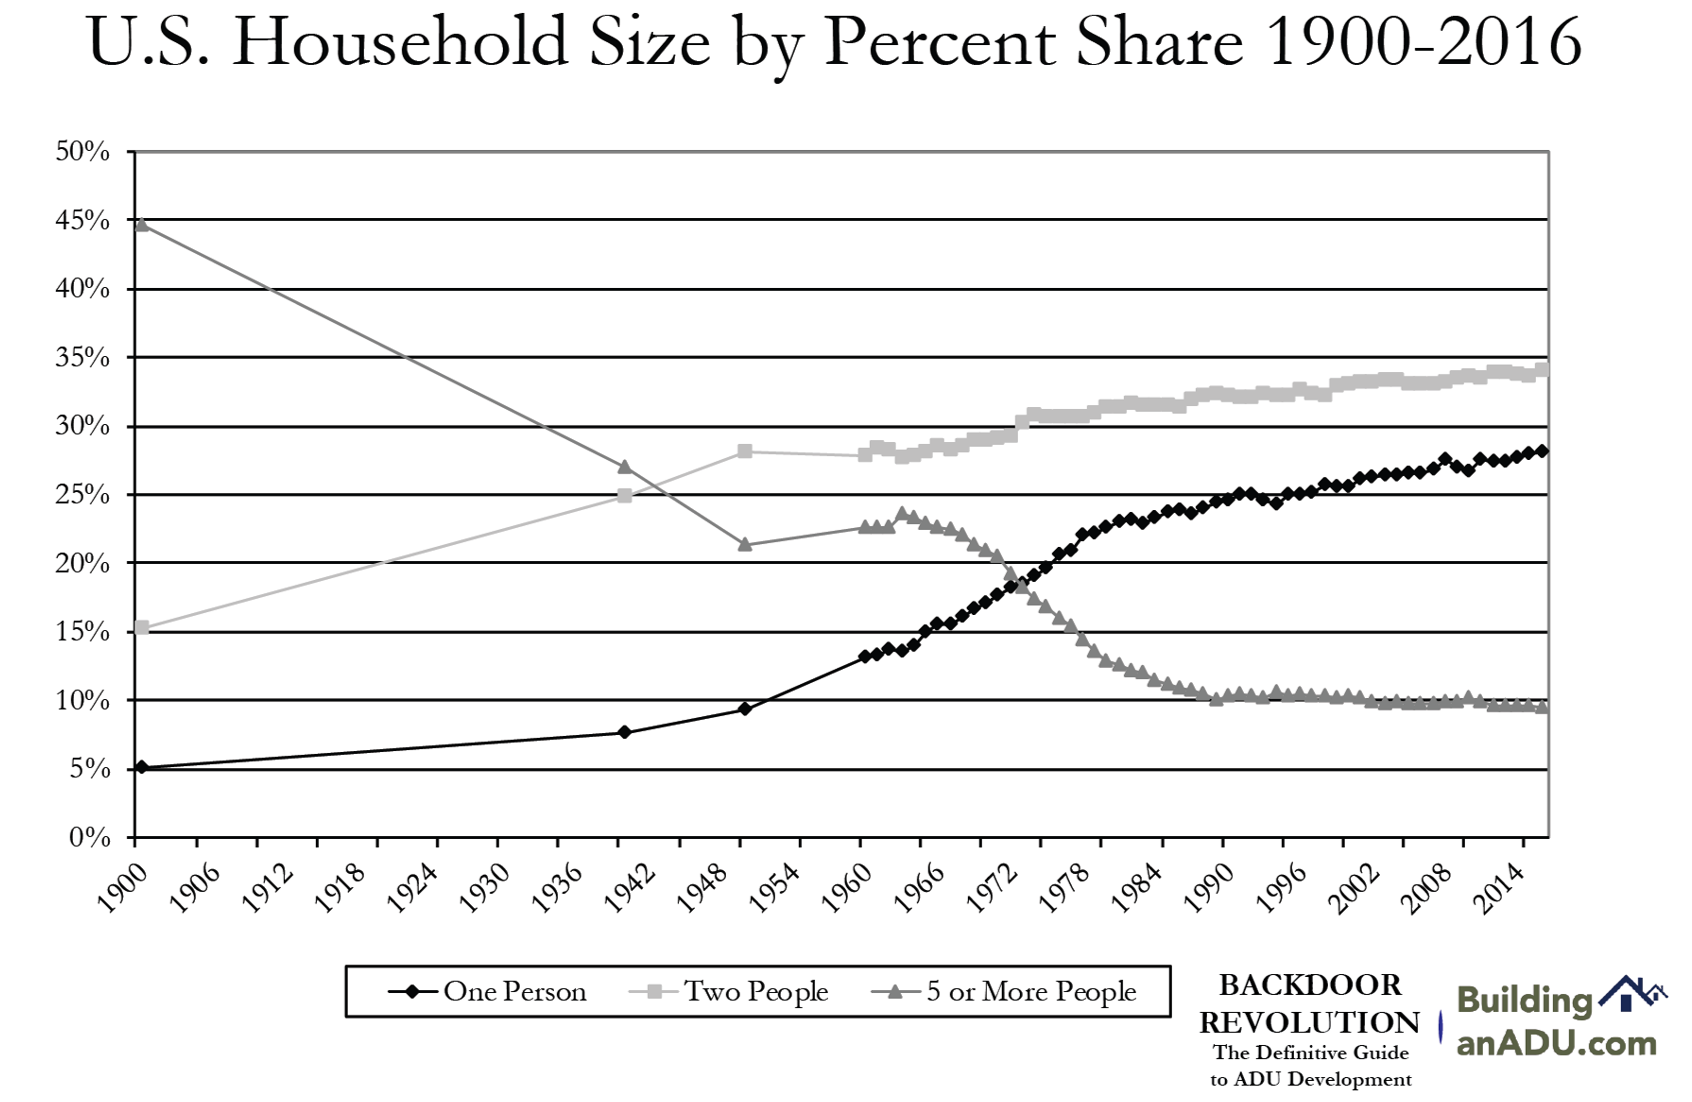  US household sizes have been shrinking for a century. Backdoor Revolution explains some of the factors that have contributed to this trend, and which create a pronounced need for more small housing units in urban areas.&nbsp; 